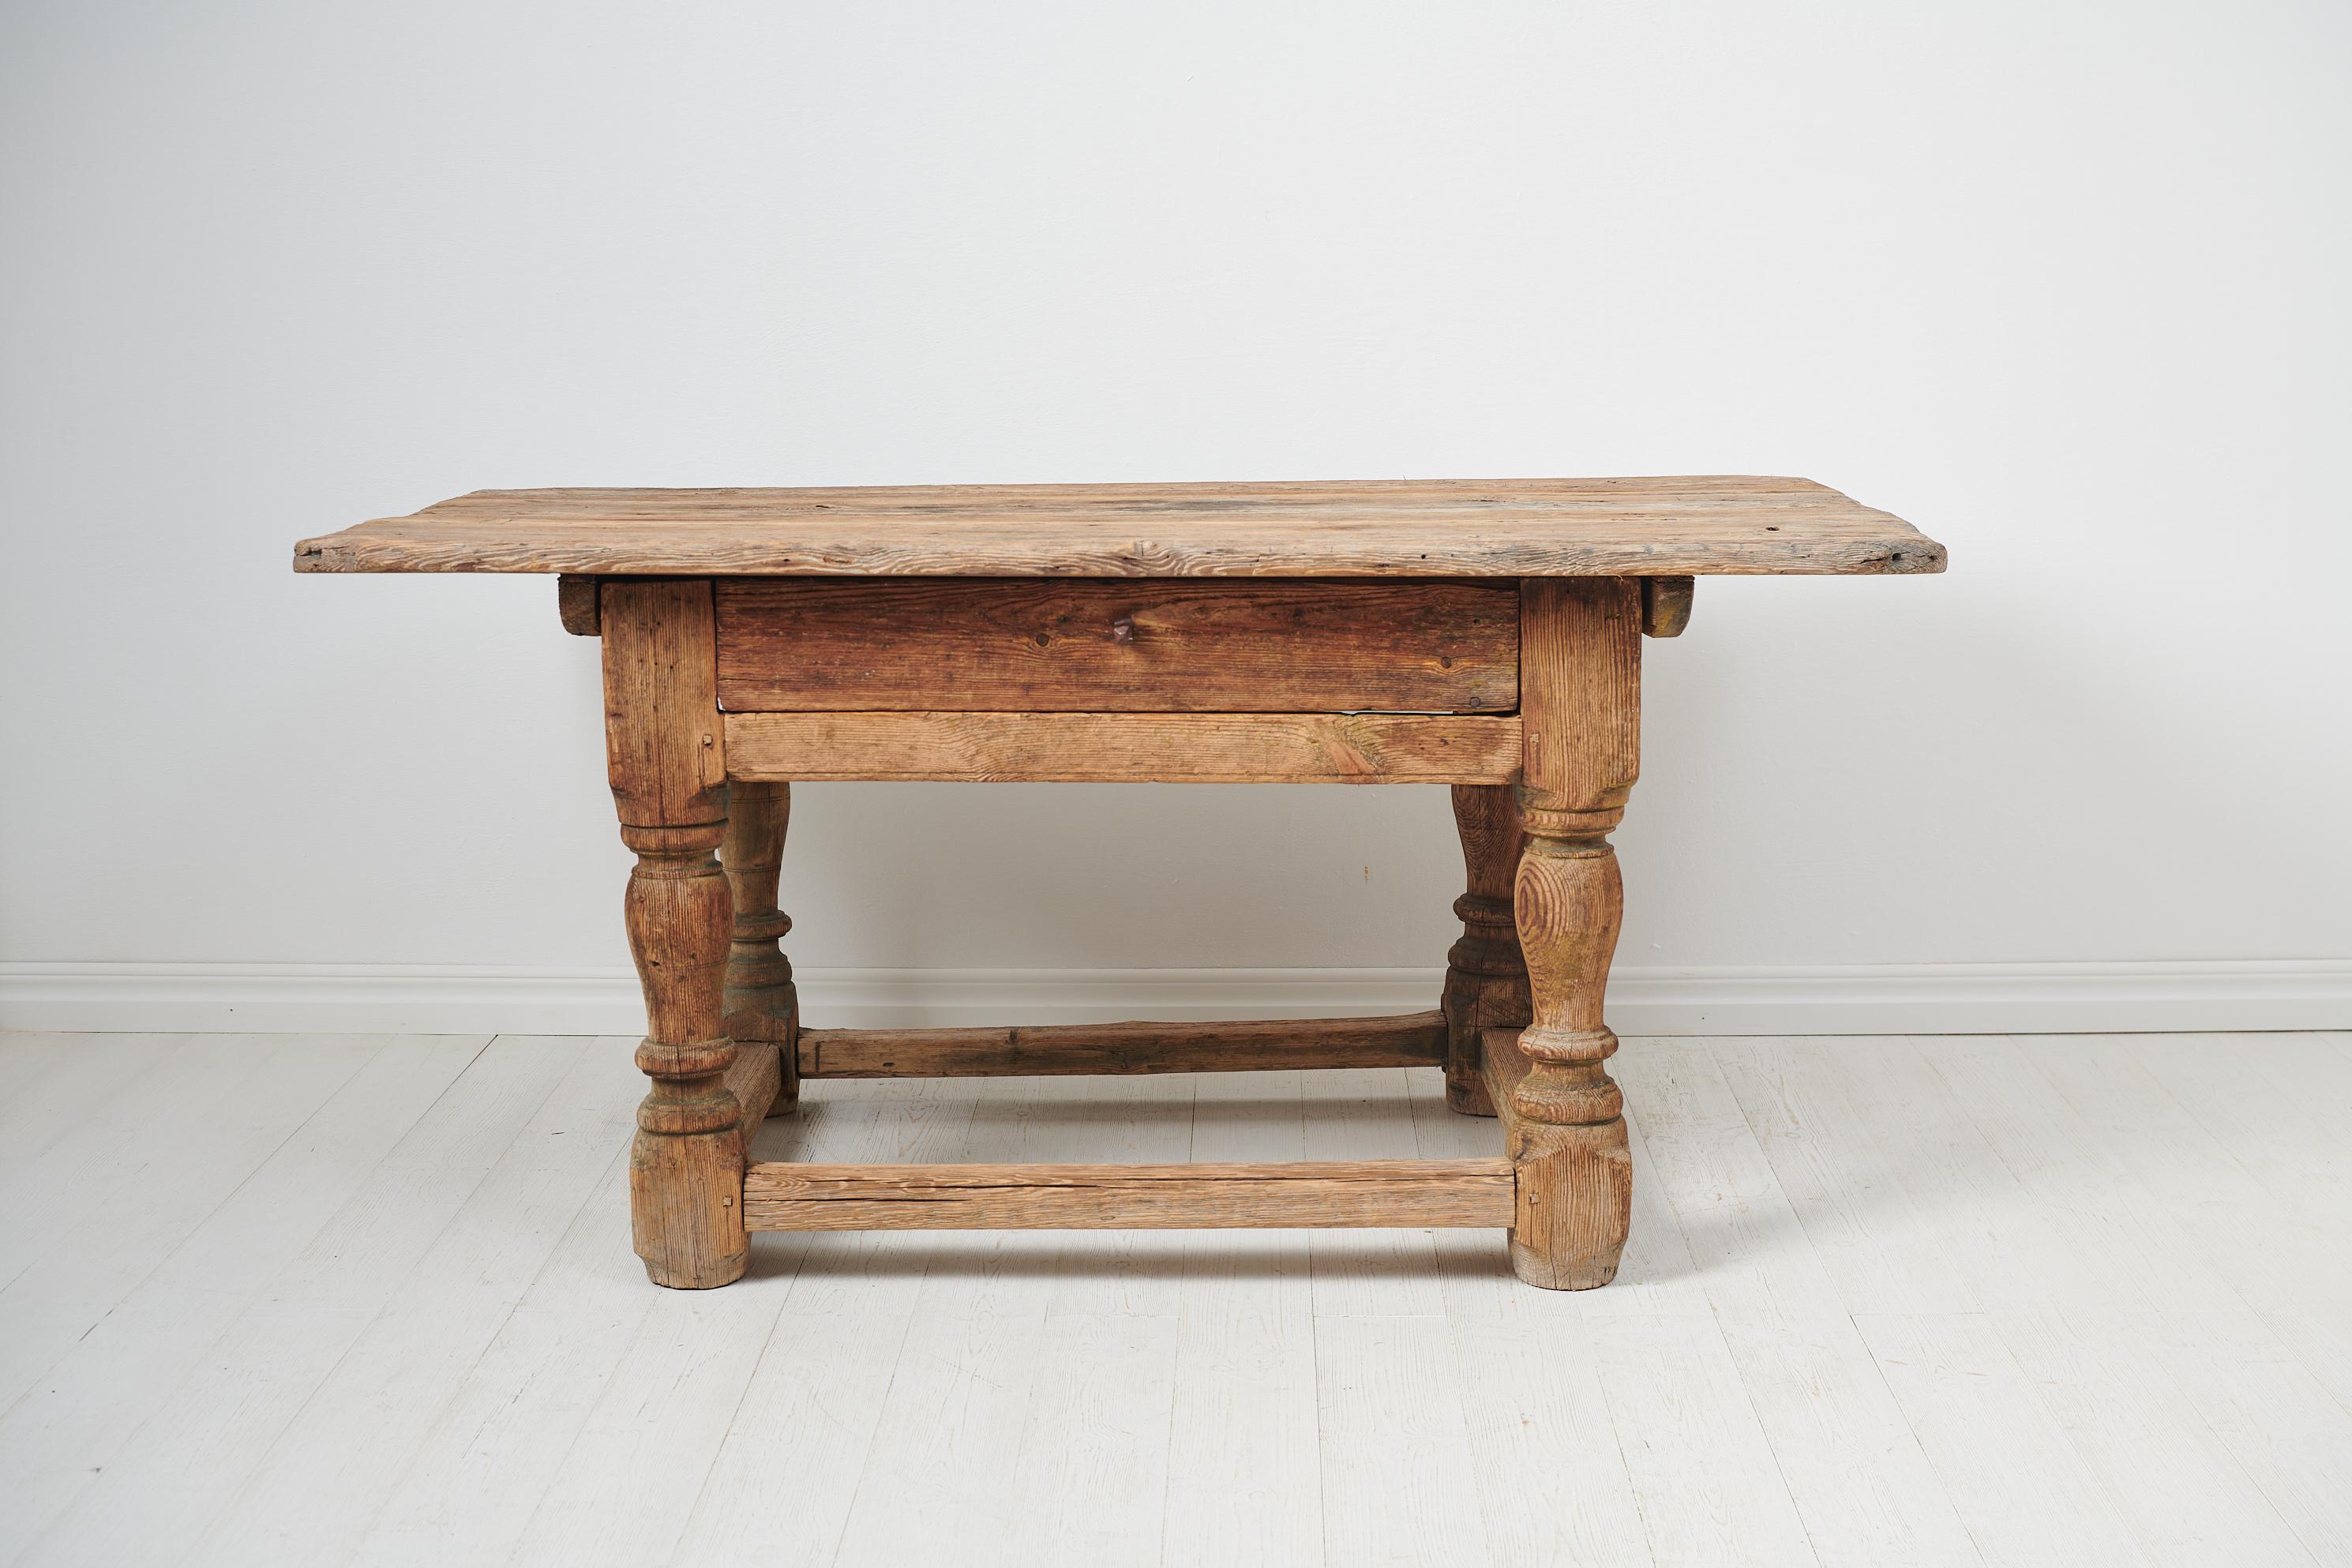 Unique Swedish Baroque table made by hand during the mid 1700s. The table is a very rare example of early Swedish furniture and has a frame in pine with heavy, solid lathed legs. The table has a fantastic patina as the surface has been left